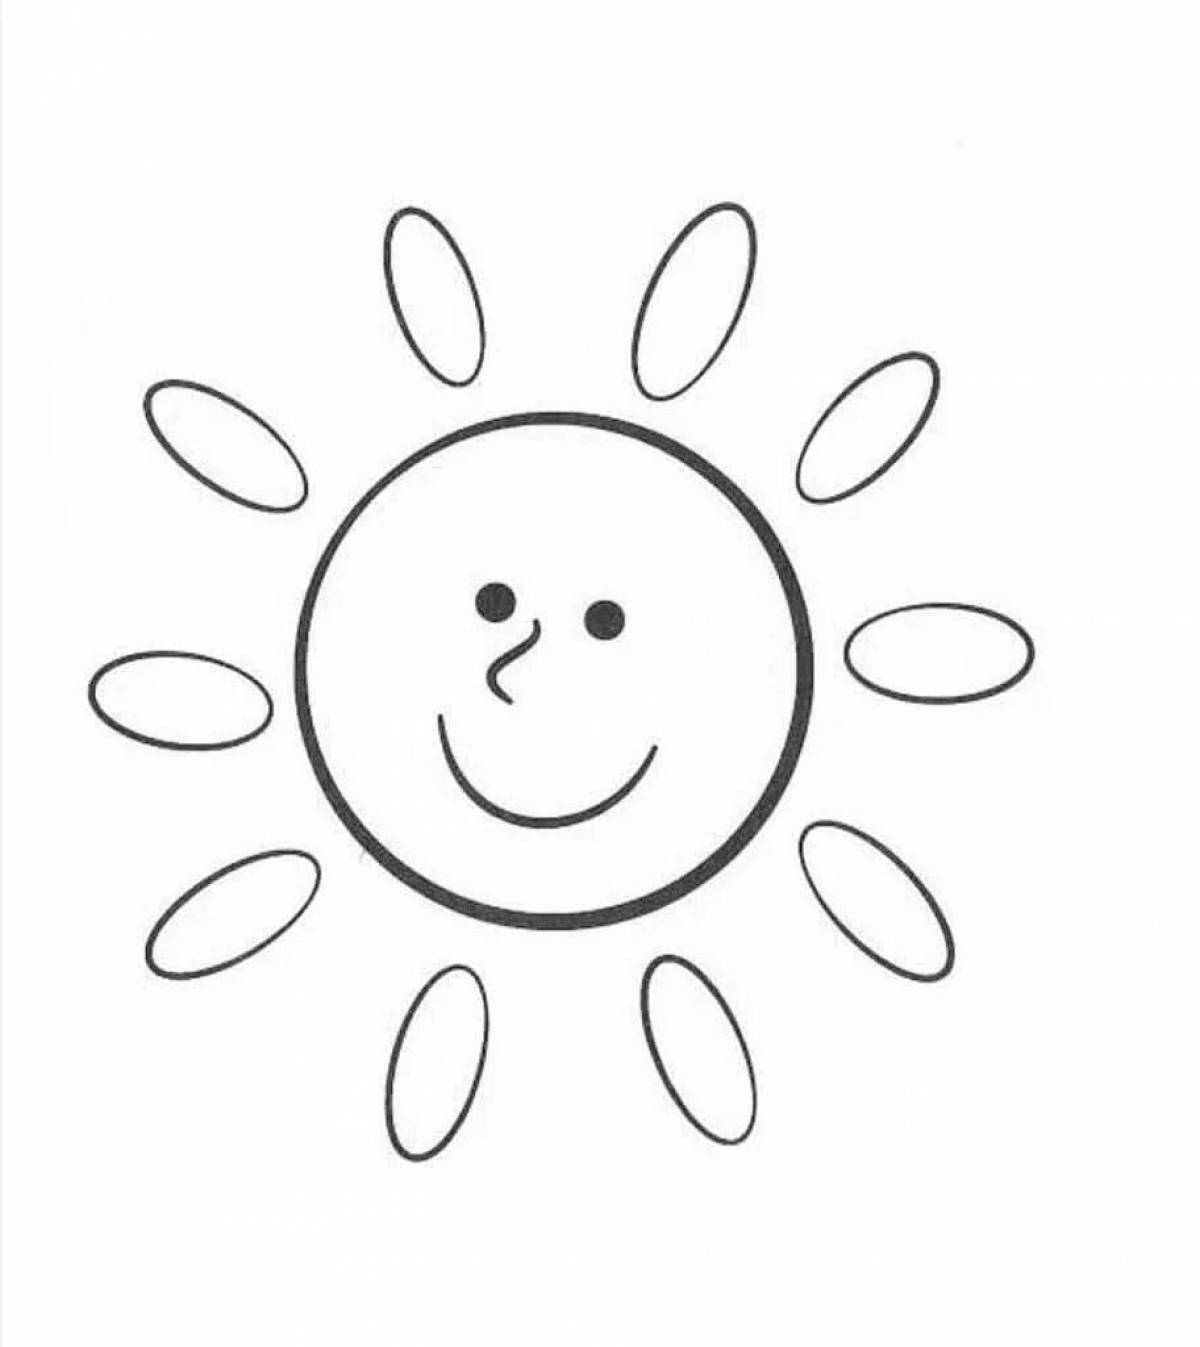 Exquisite sun coloring book for 3-4 year olds